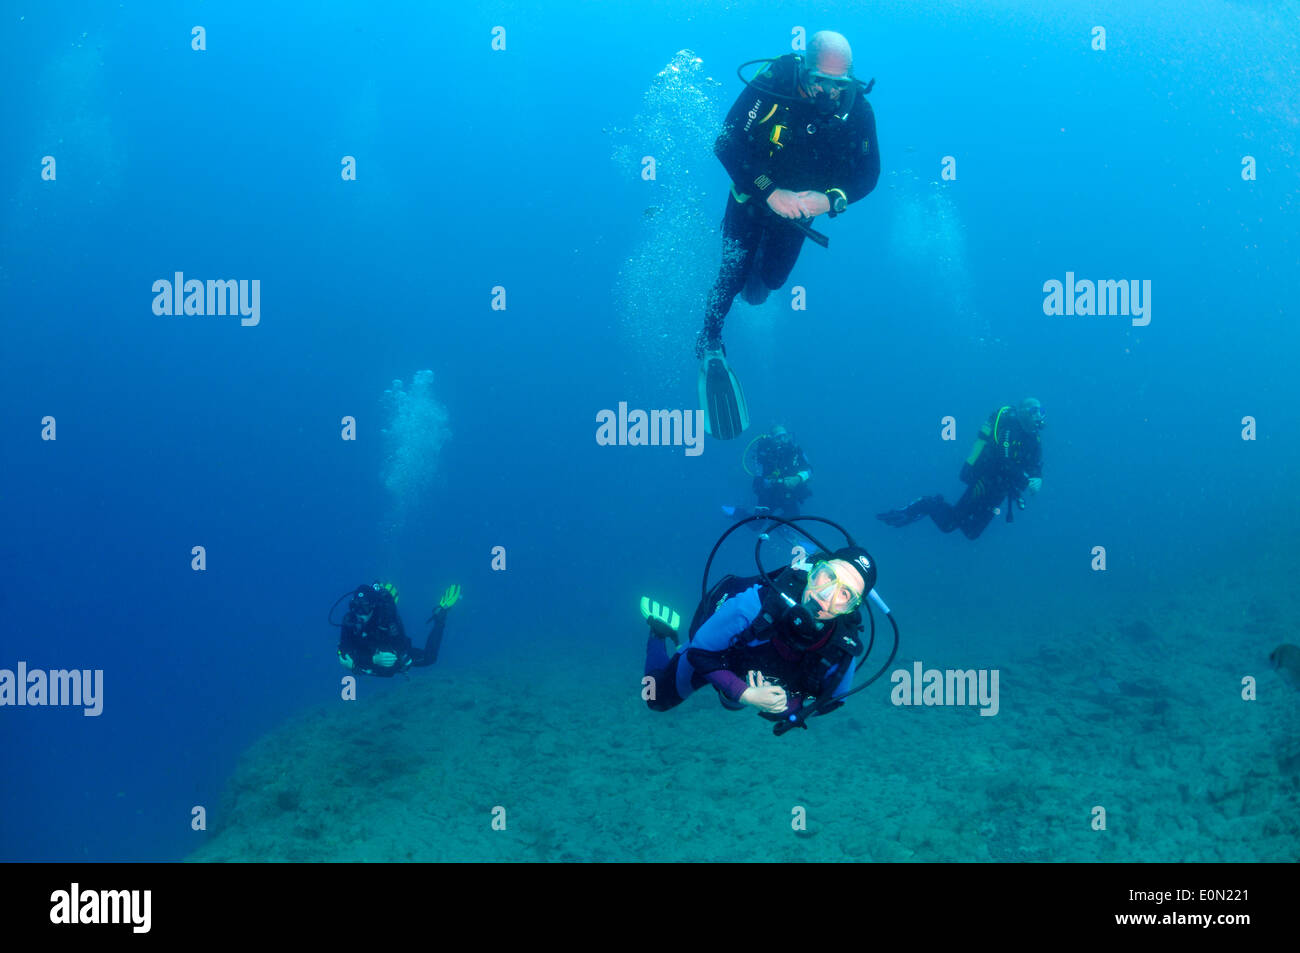 Group of scuba divers in blue water, Tenerife Stock Photo